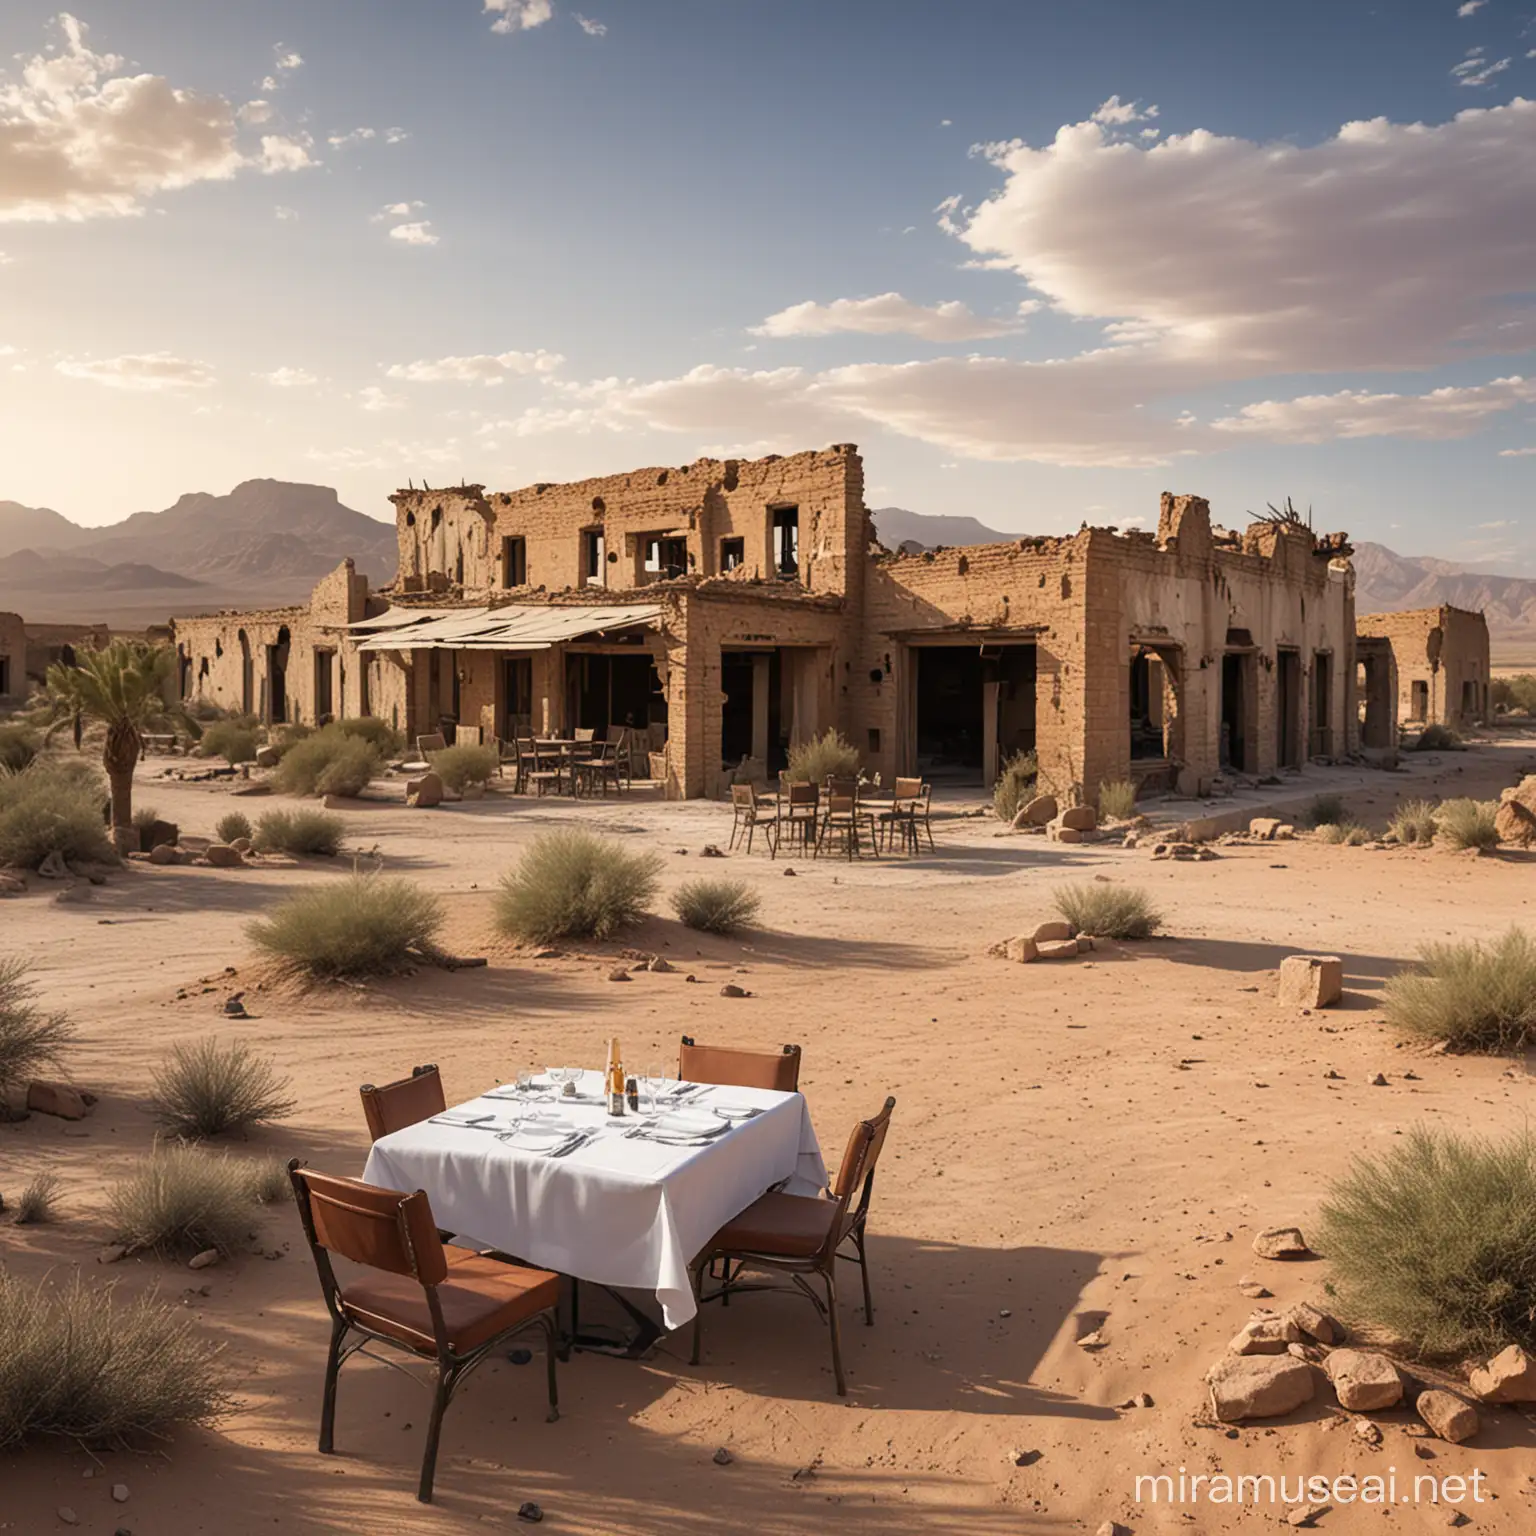 A desert landscape with a restaurant in ruins